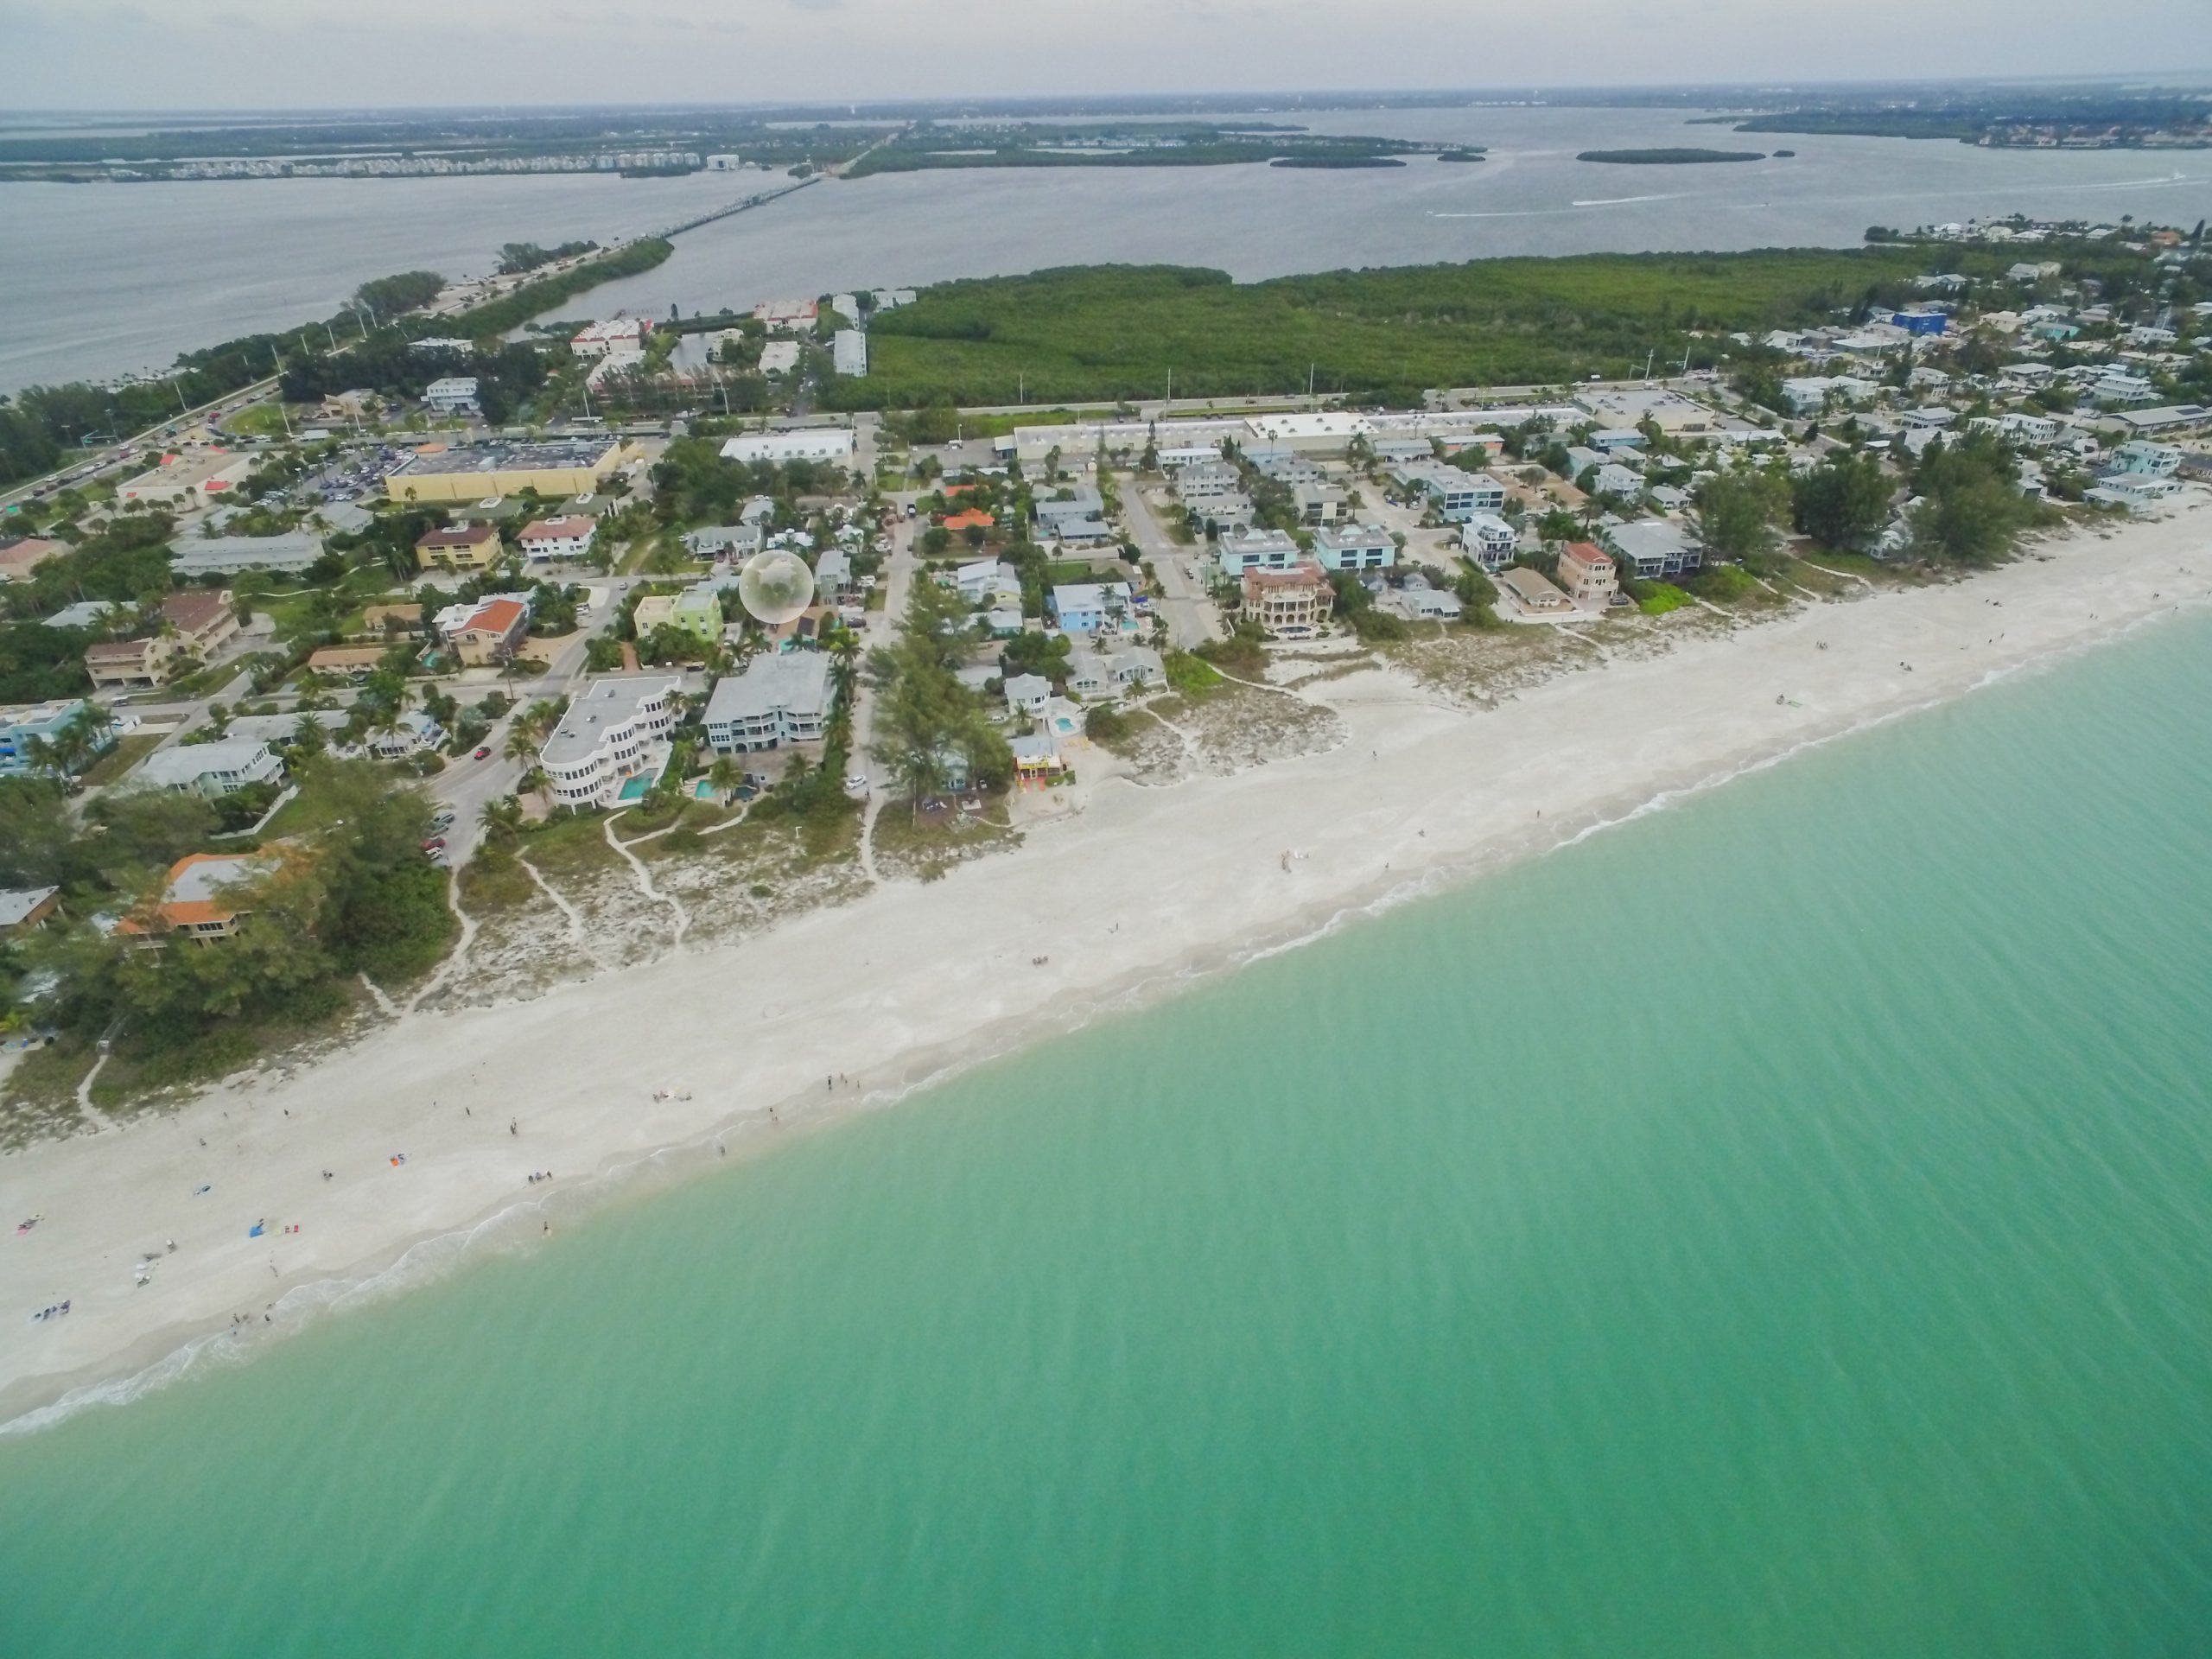 Why Choose Anna Maria Island For Your Next Florida Beach Vacation?